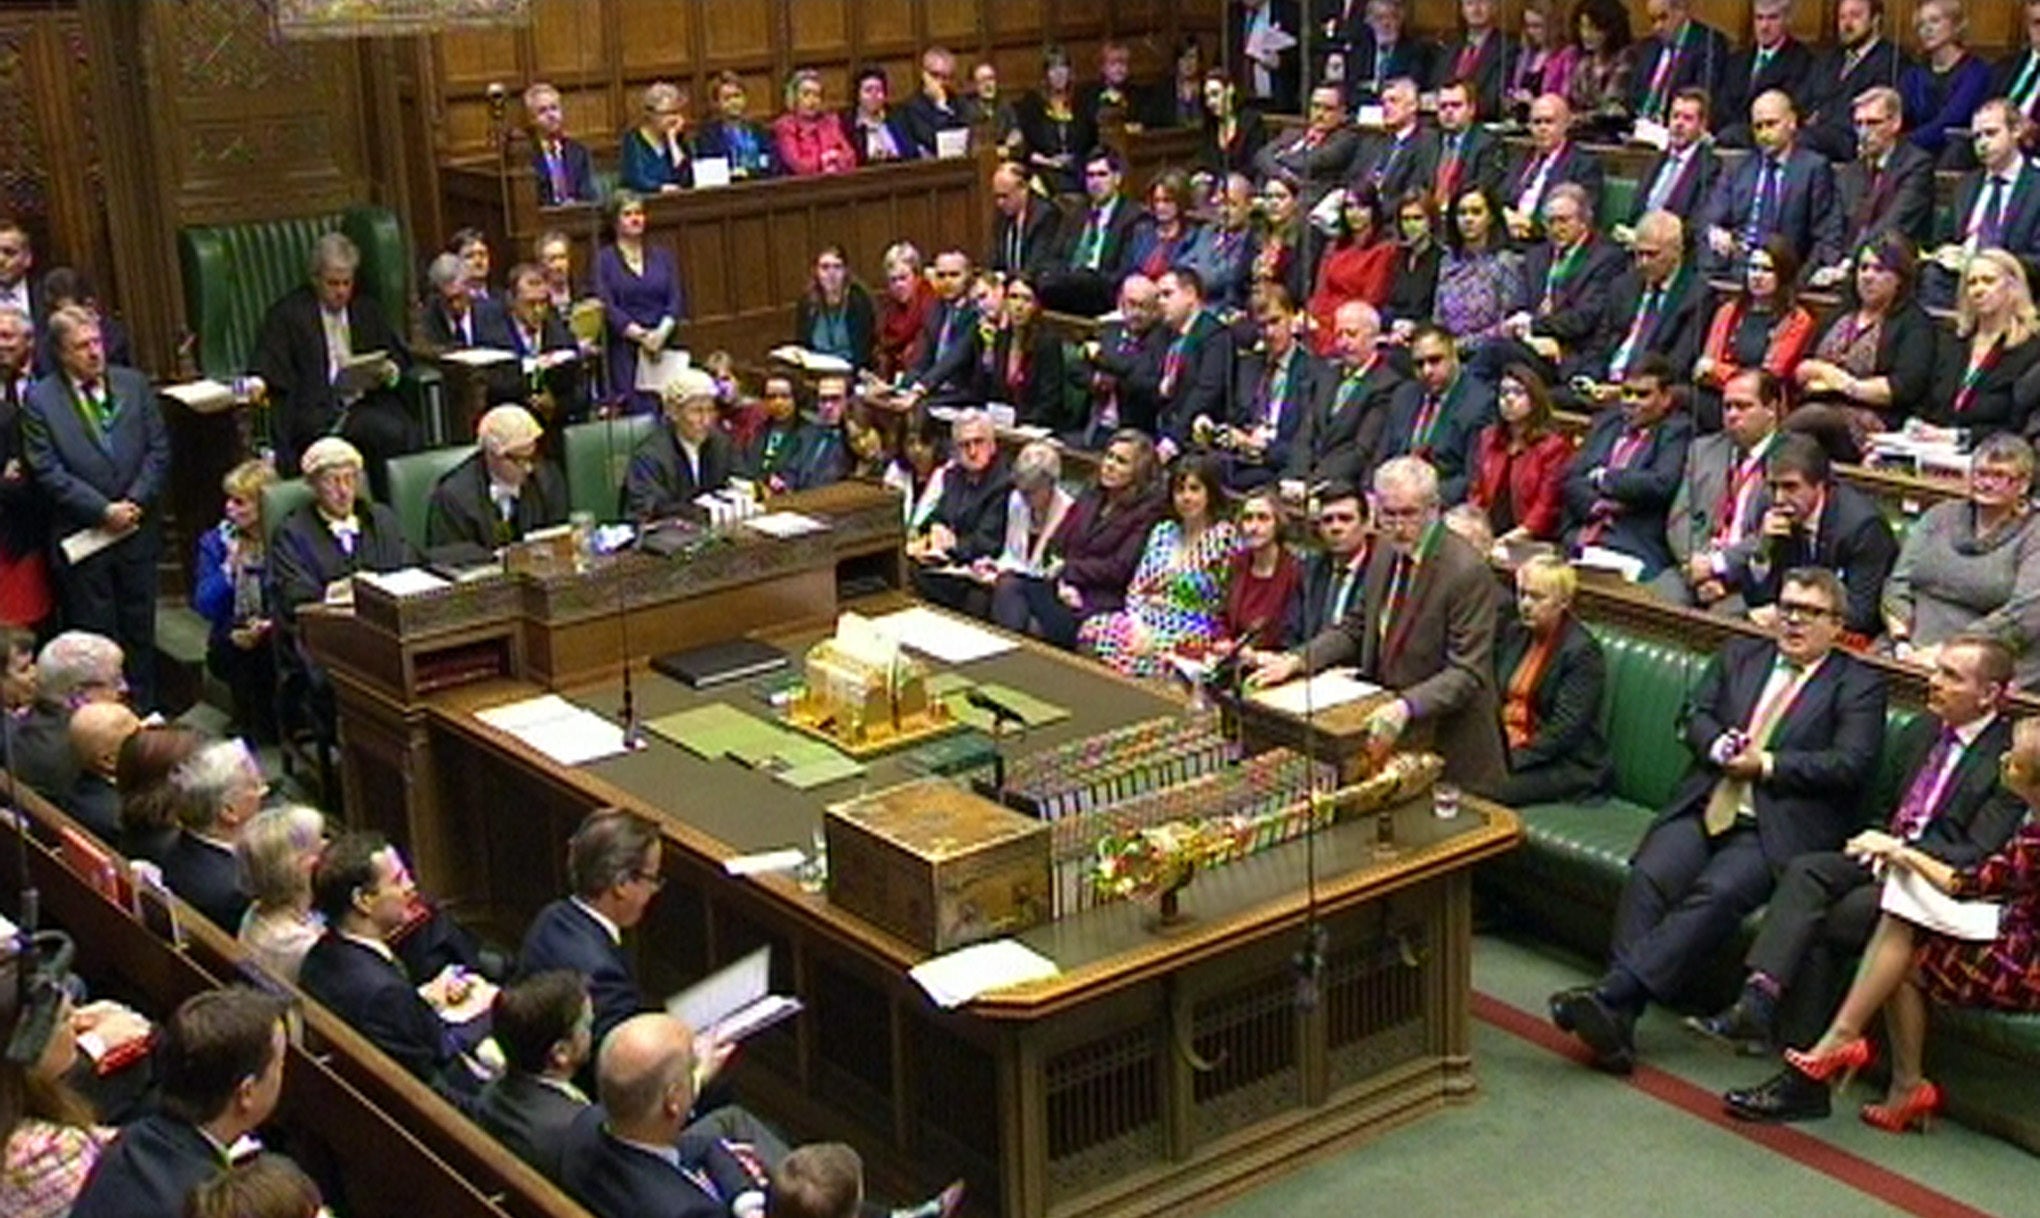 MPs during a debate in the House of Commons